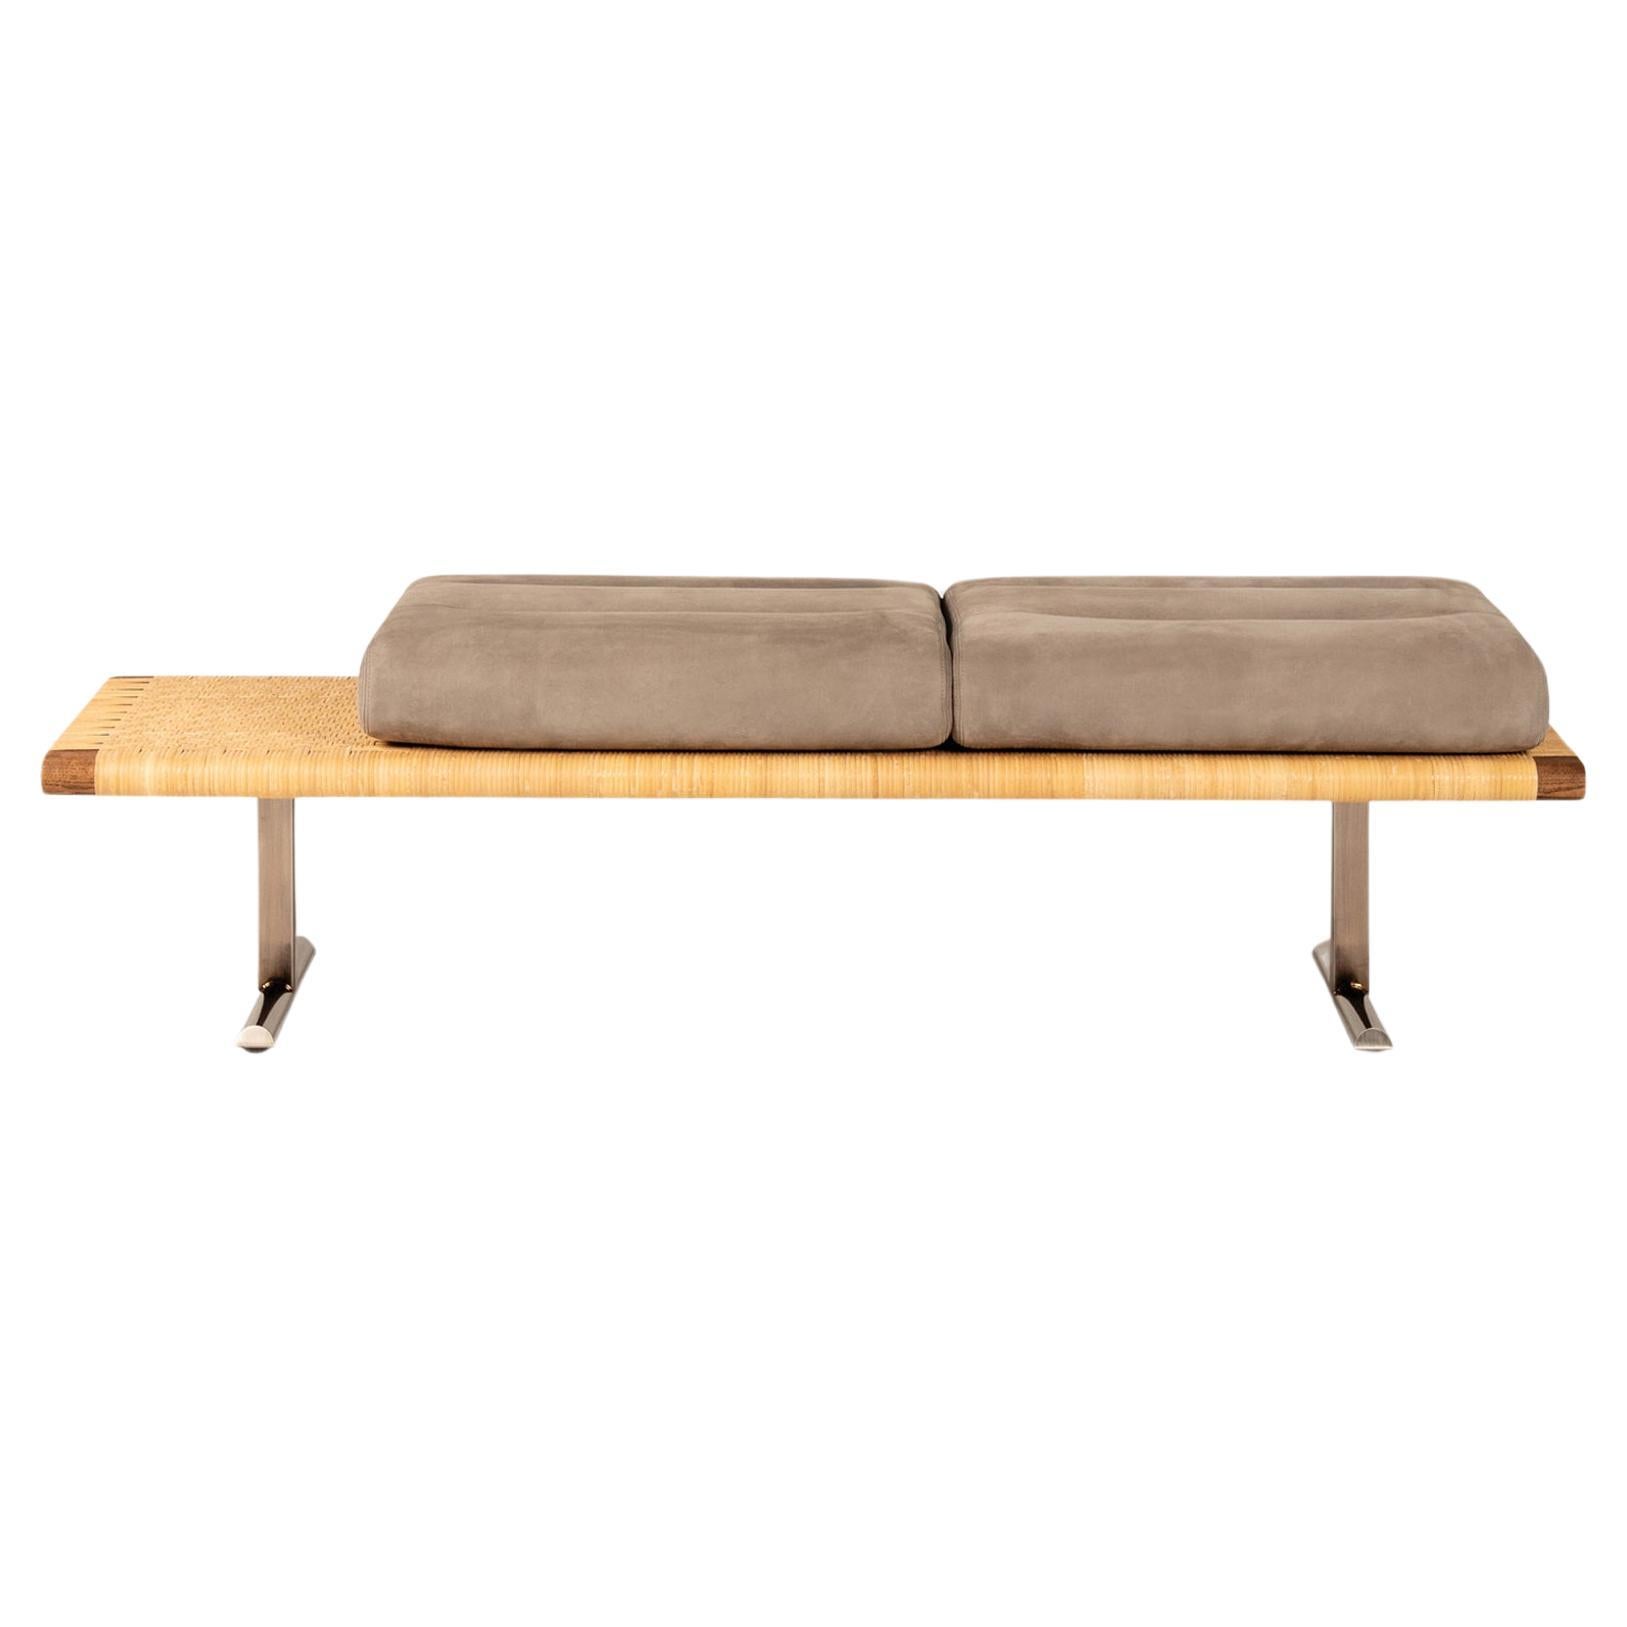 El Raval Walnut Stained Natural Rattan Bench by Yabu Pushelberg